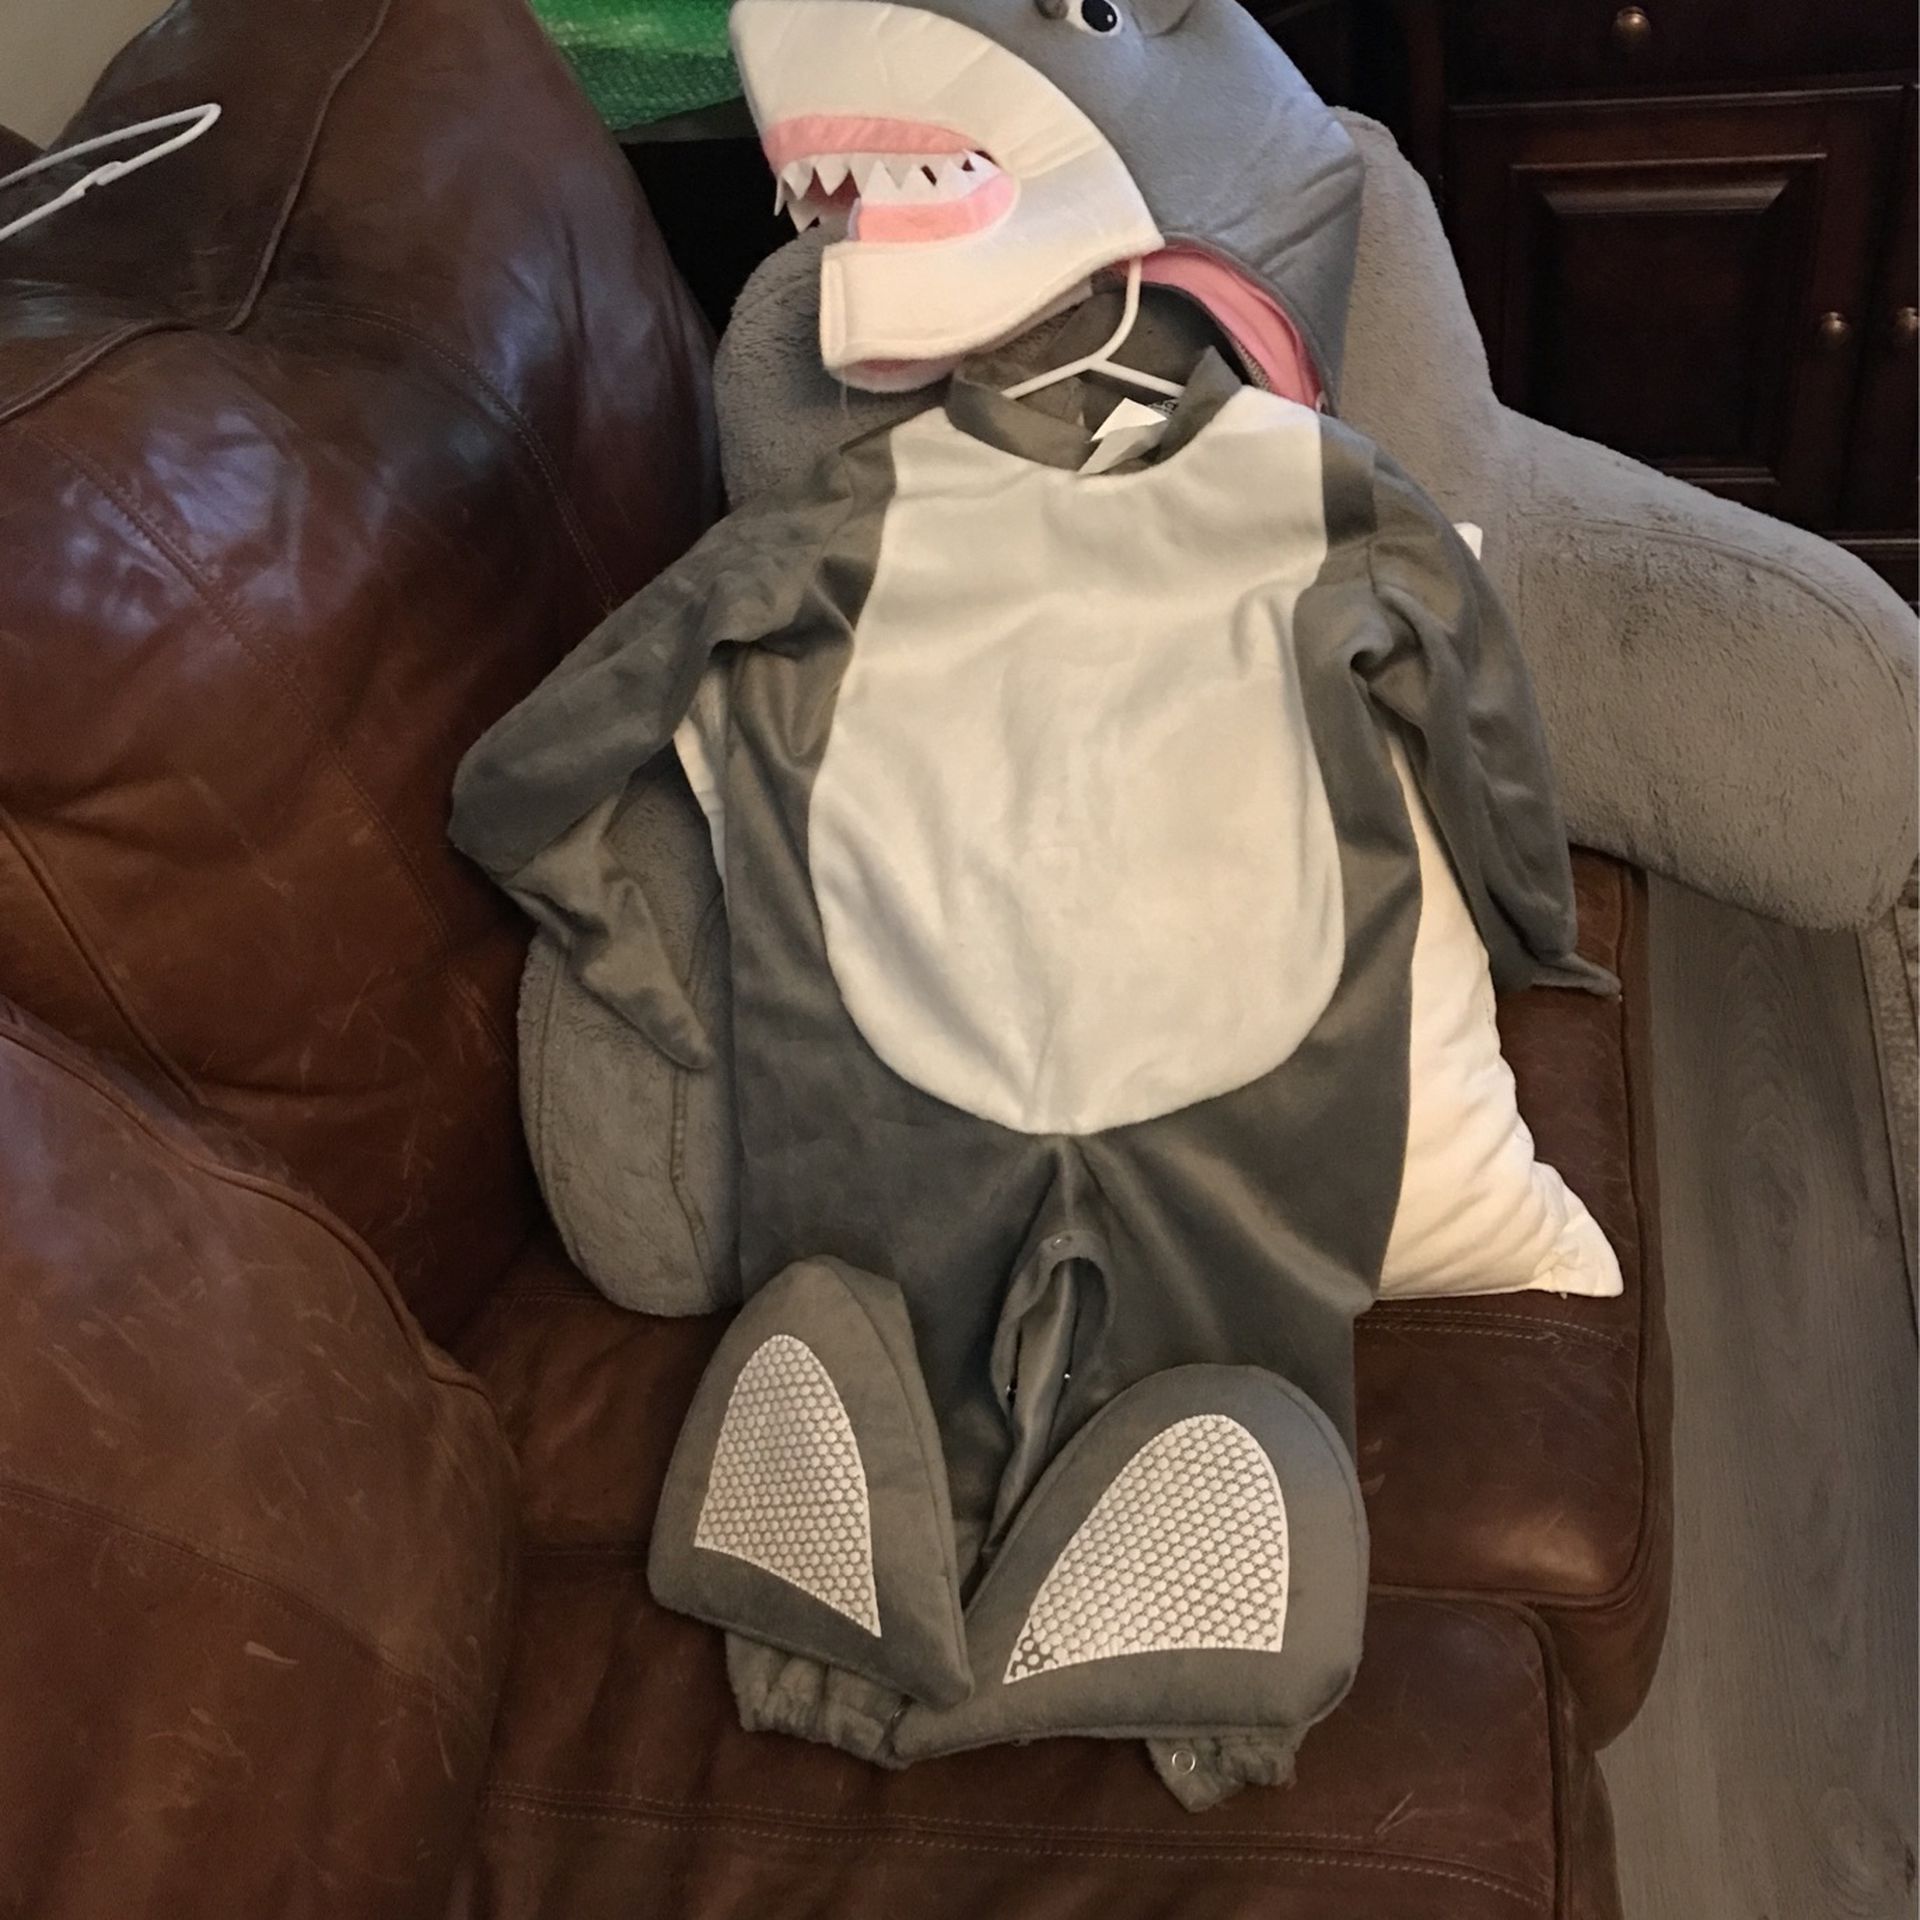 Shark Costume For Baby 18-24 Months